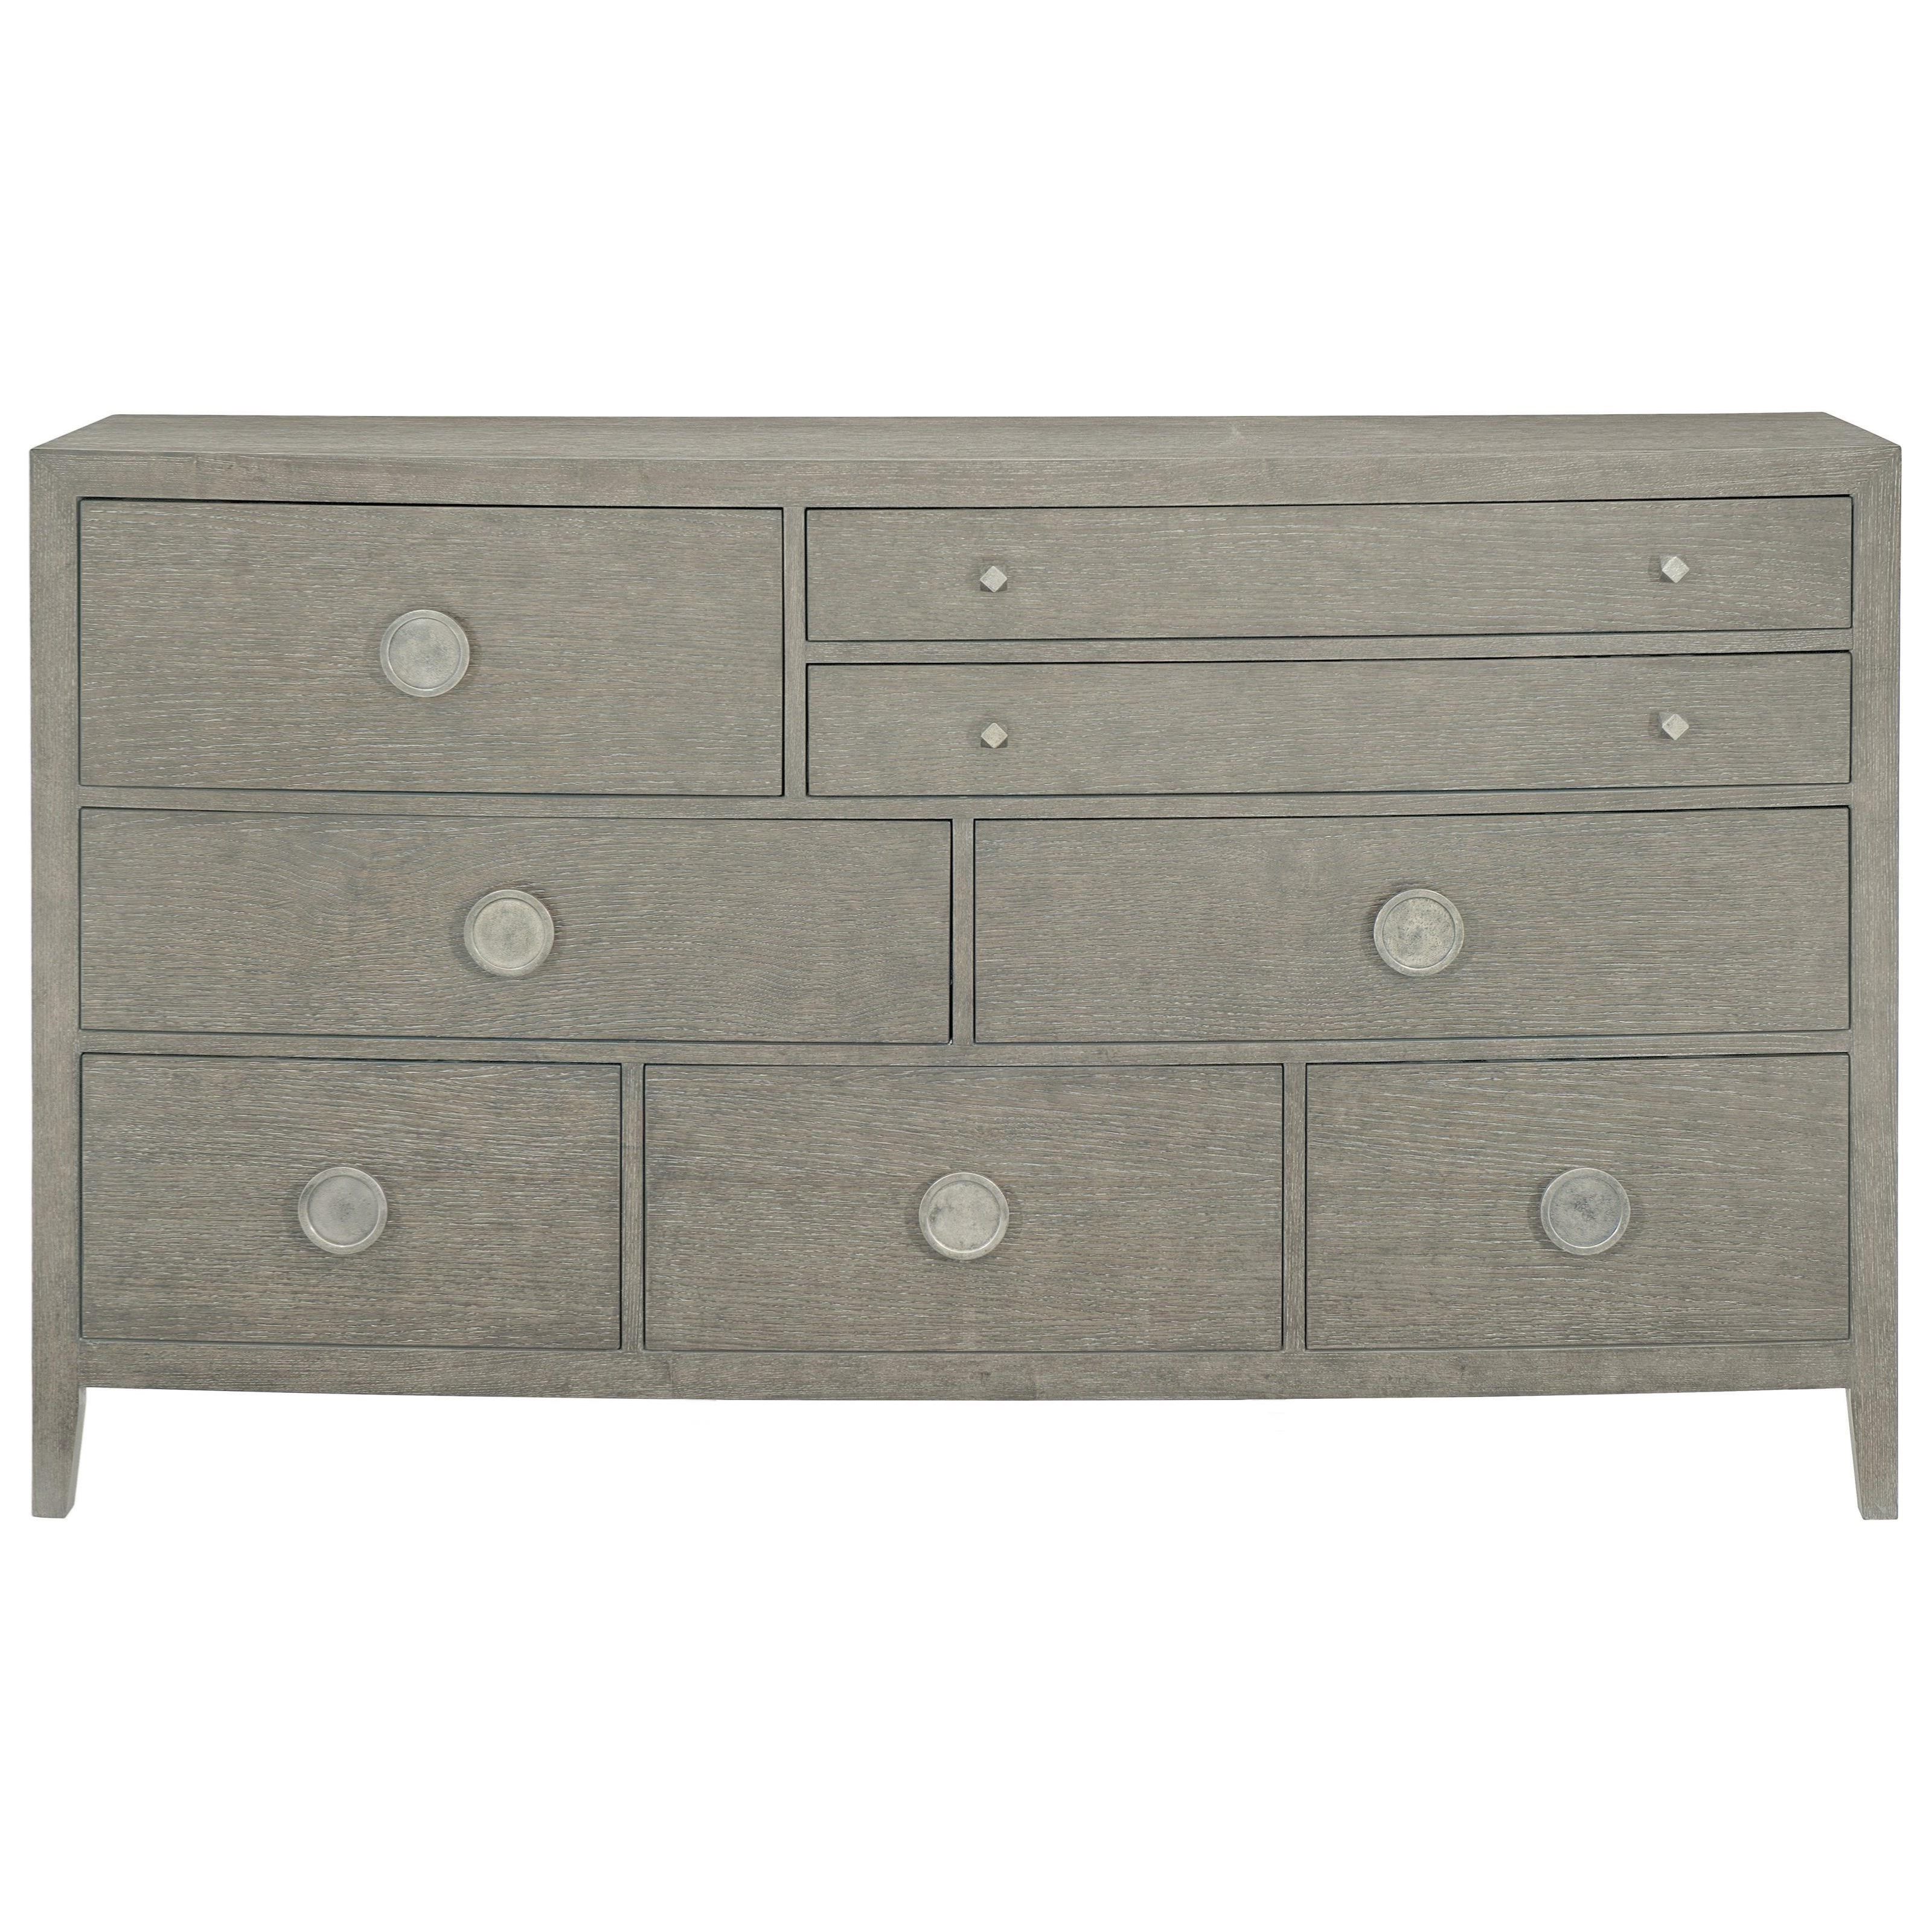 Linea Relaxed Vintage Dresser With 8 Drawersbernhardt At Dunk & Bright  Furniture Pertaining To Bright Angles Credenzas (View 18 of 20)